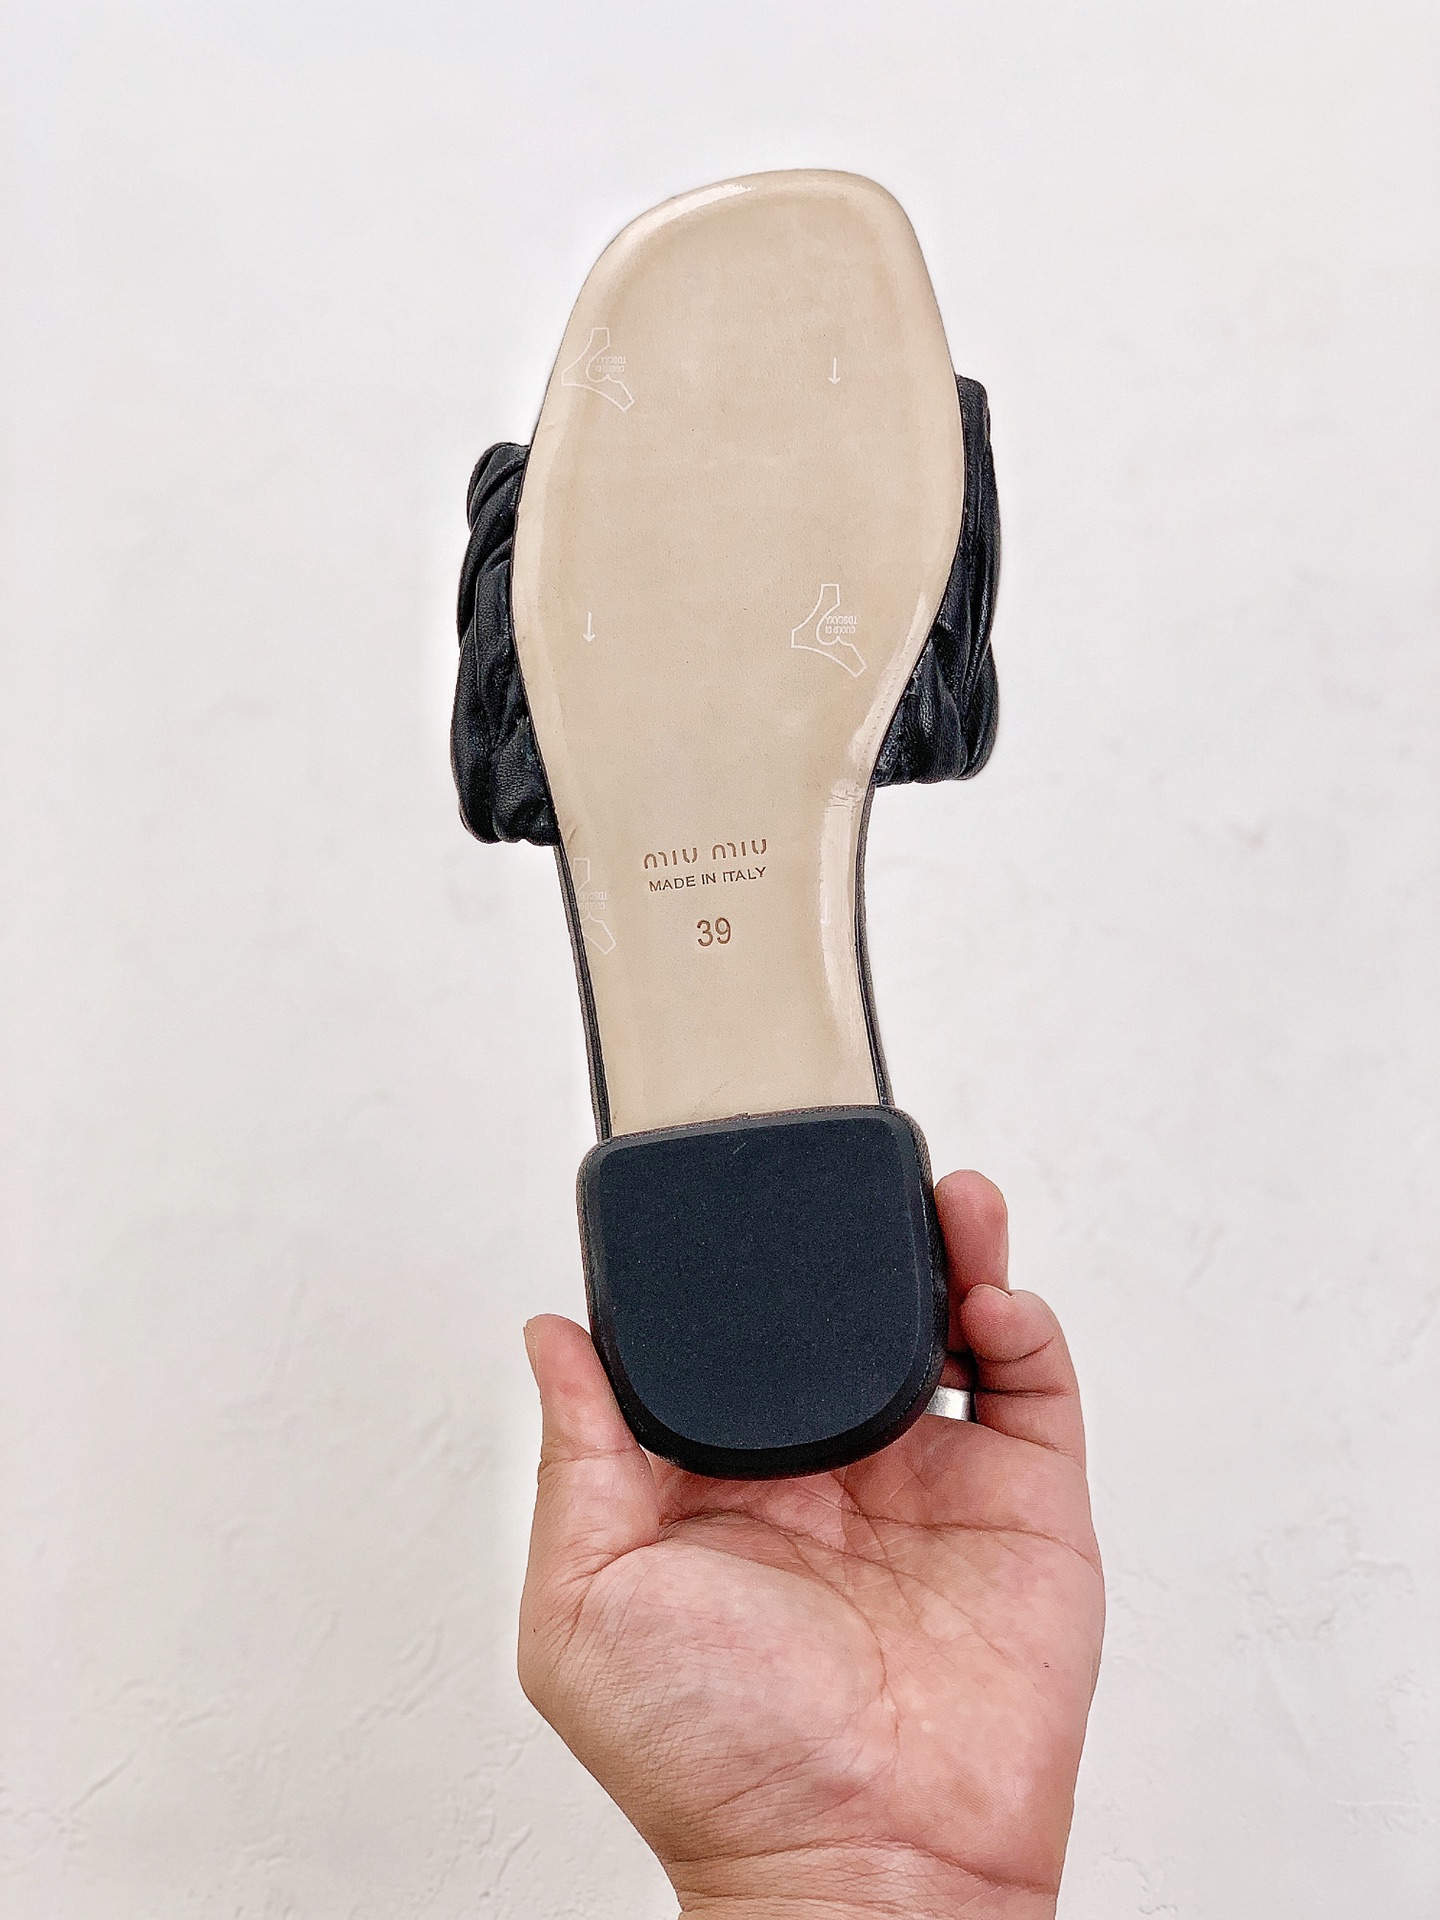 Introduction to MIUMIU summer item SNGG｜Pleated colorful flat slippers MiuMiu slippers